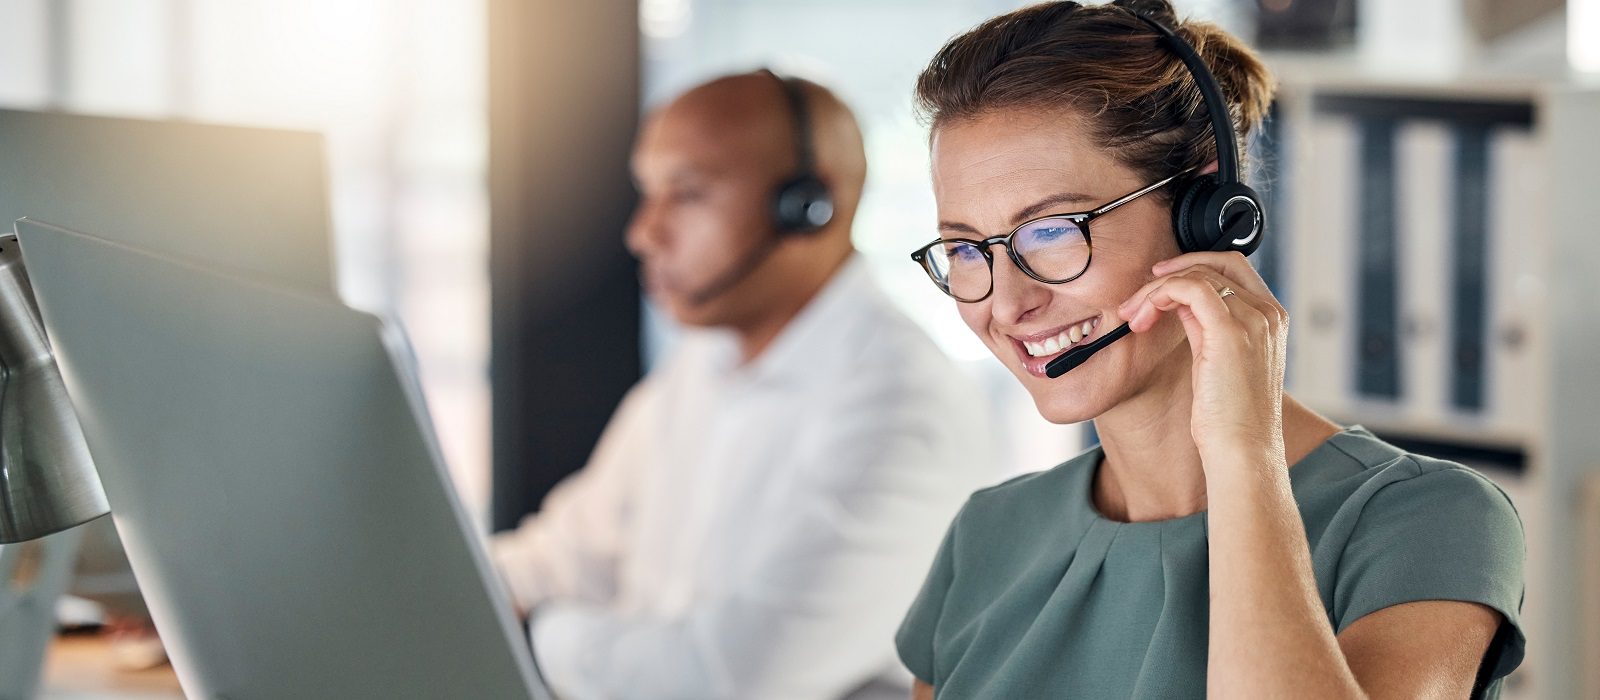 Customer service, call center and crm with a woman consultant working in a telemarketing office. Support, computer and sales with a female consulting using a headset for help, assist or communication.